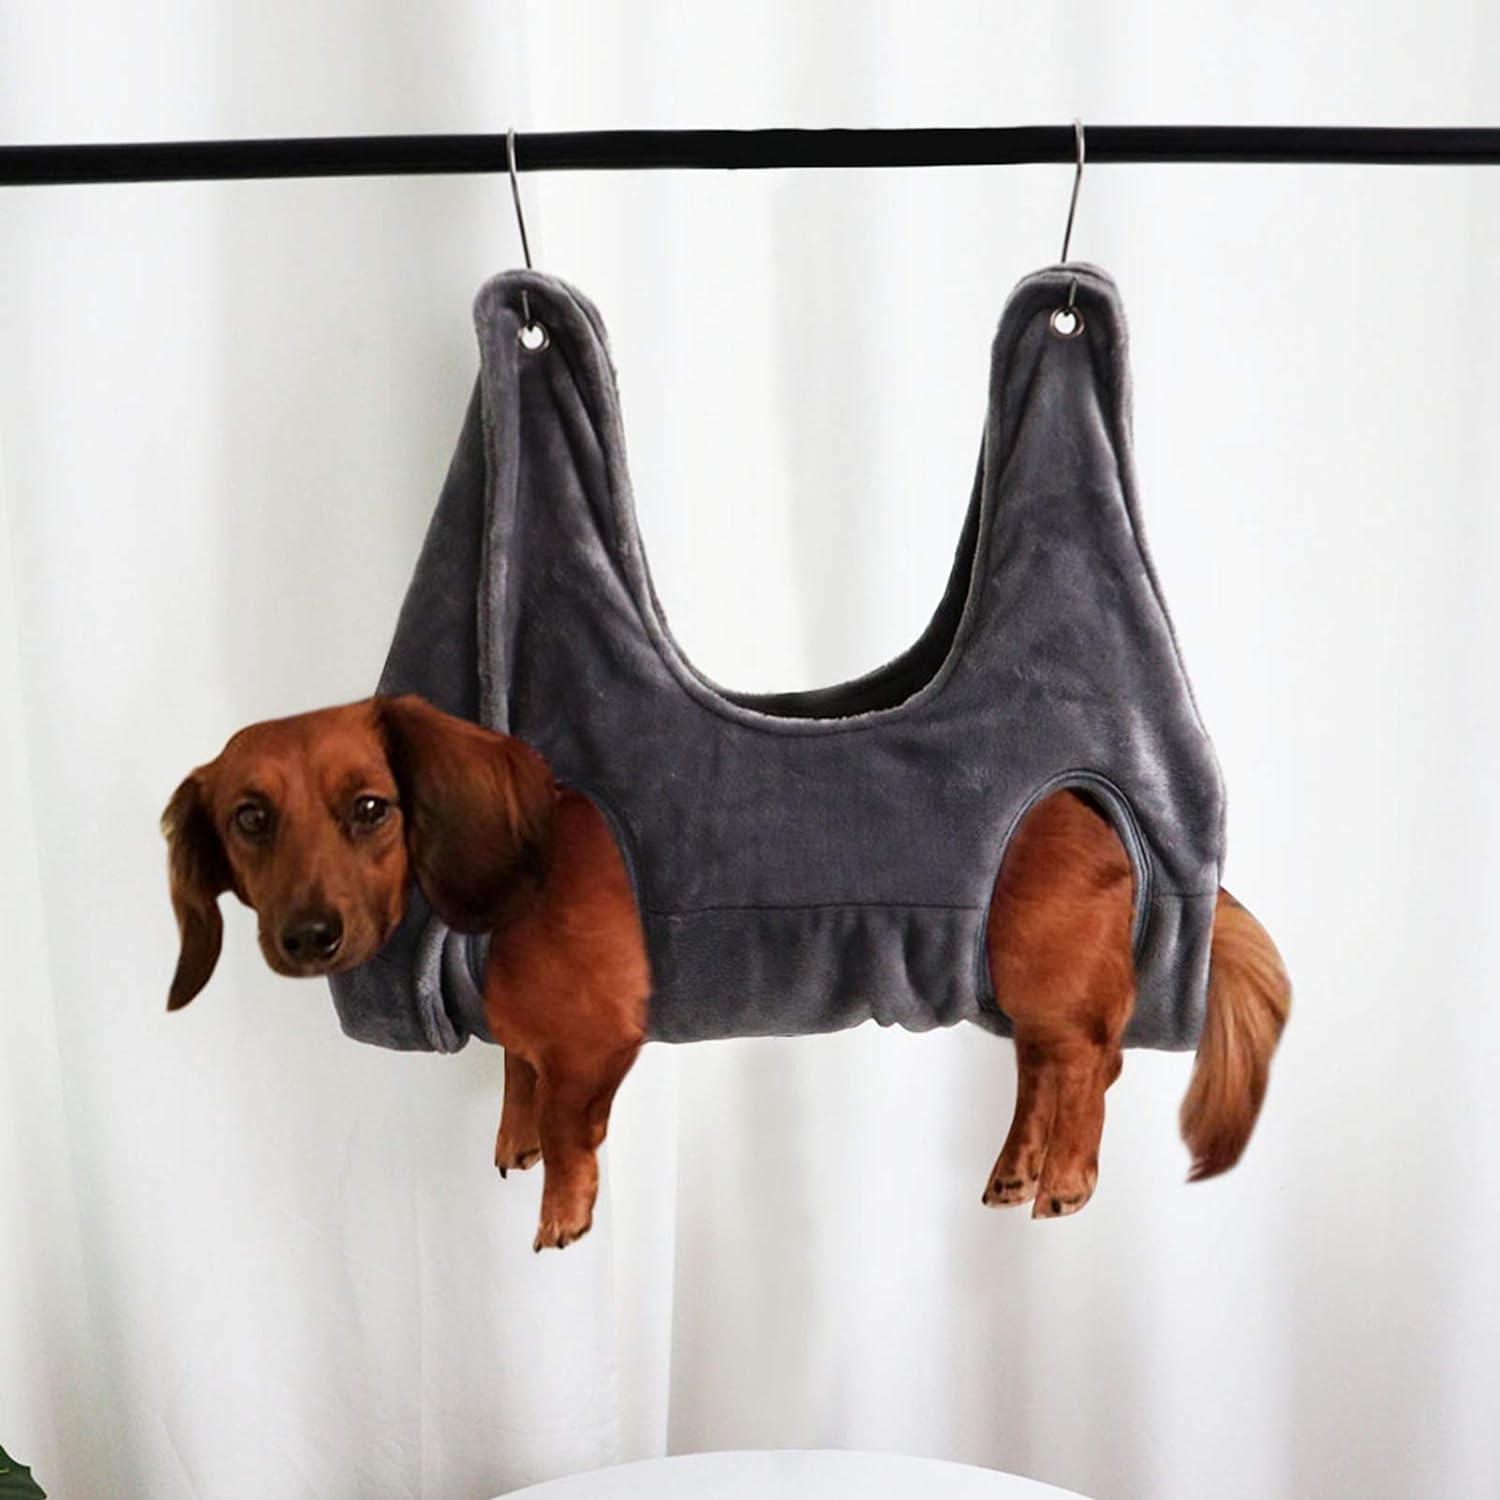 What Do You Hang A Dog Grooming Hammock On